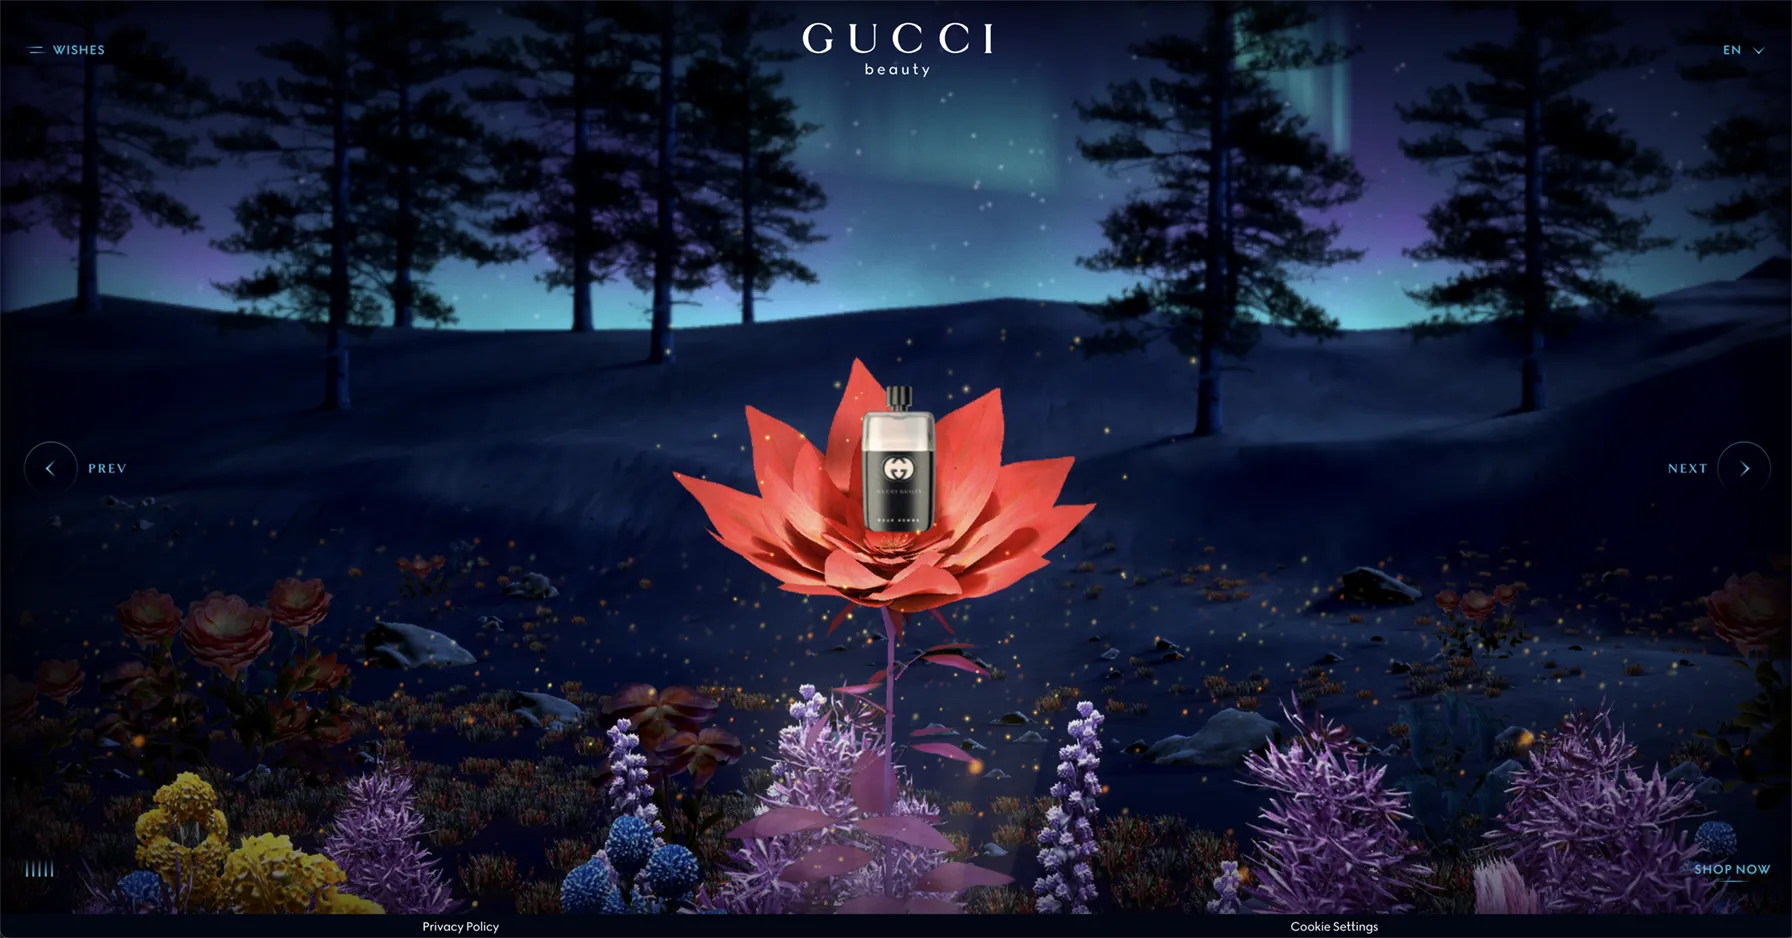 8. Gucci Beauty Wishes